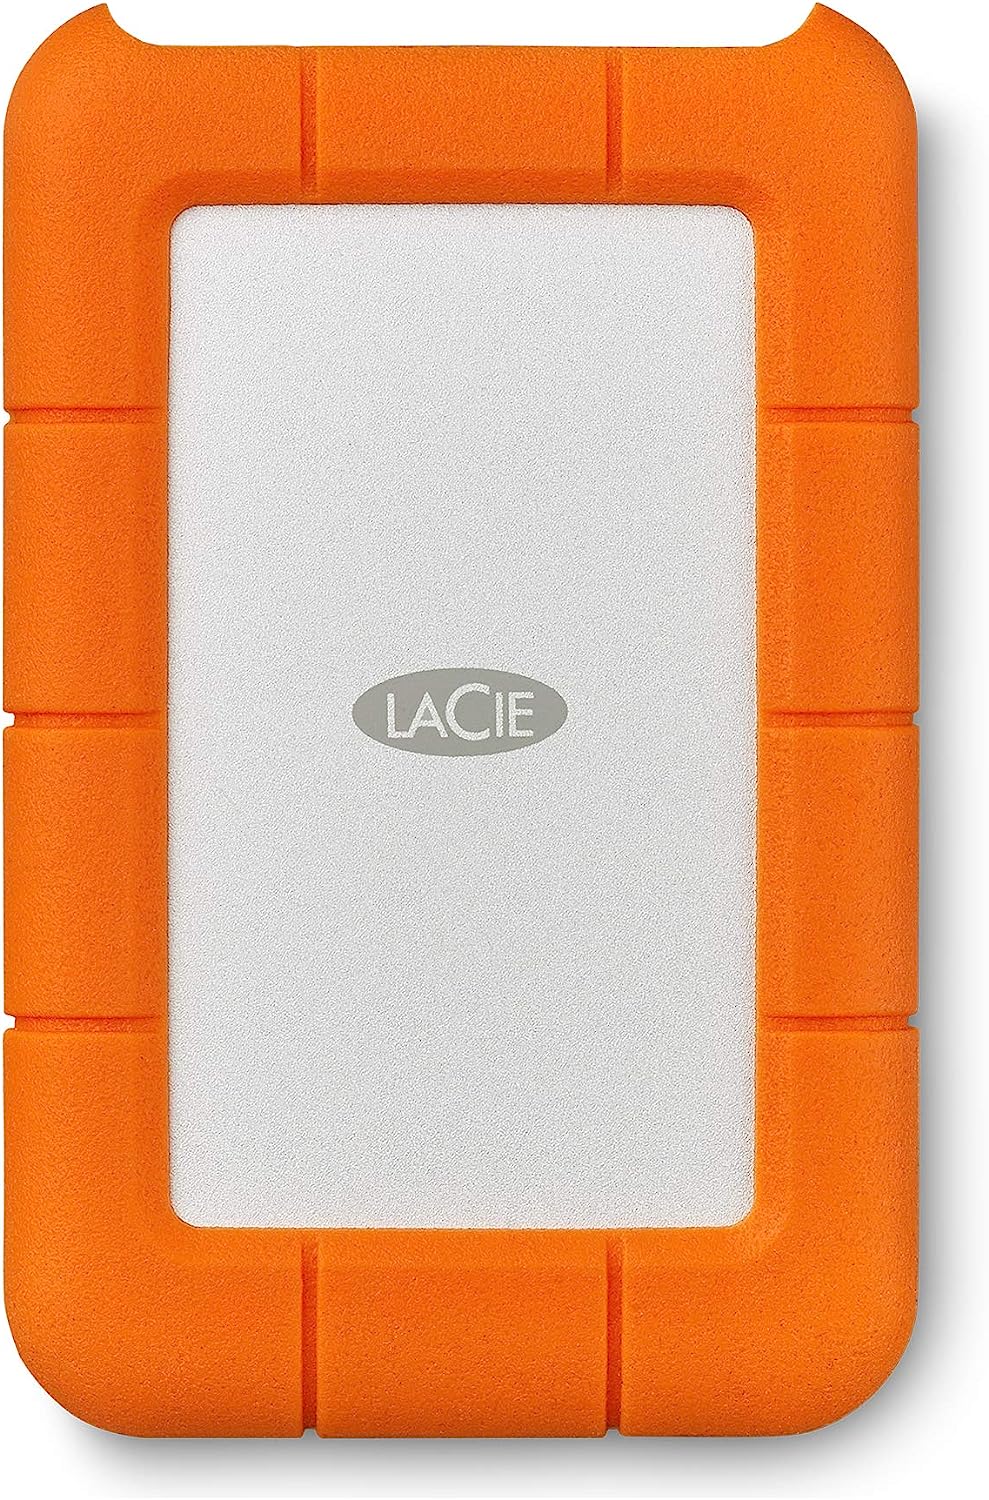 LaCie hard drive for photographers